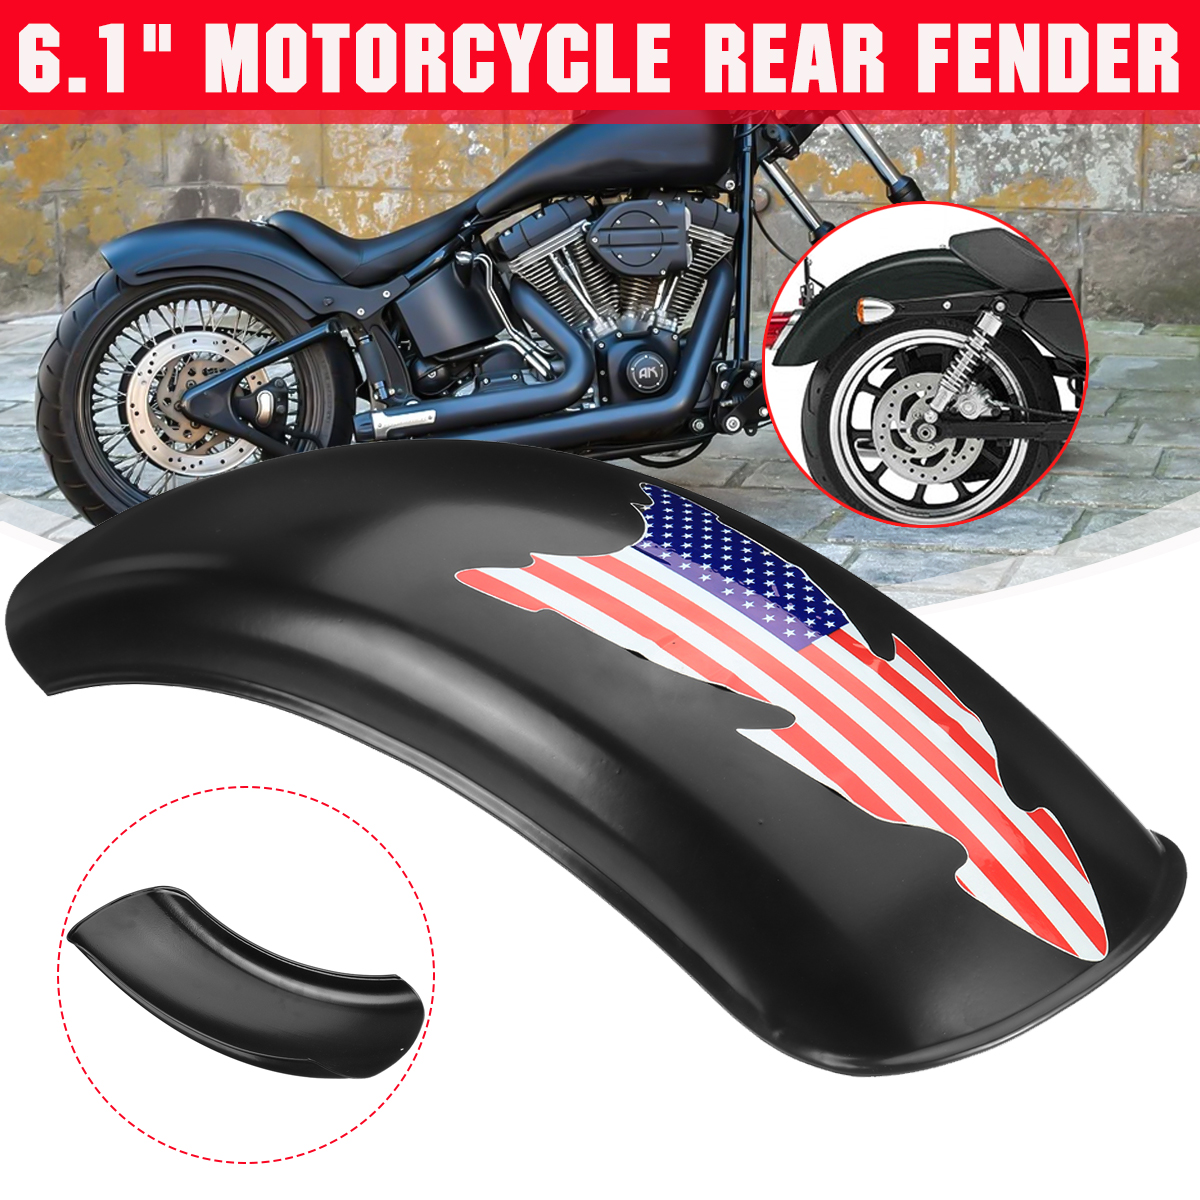 6.1 Inch Motorcycle Rear Fender Flat Mudguard Trailer Stainless Steel for Bobber Short Style